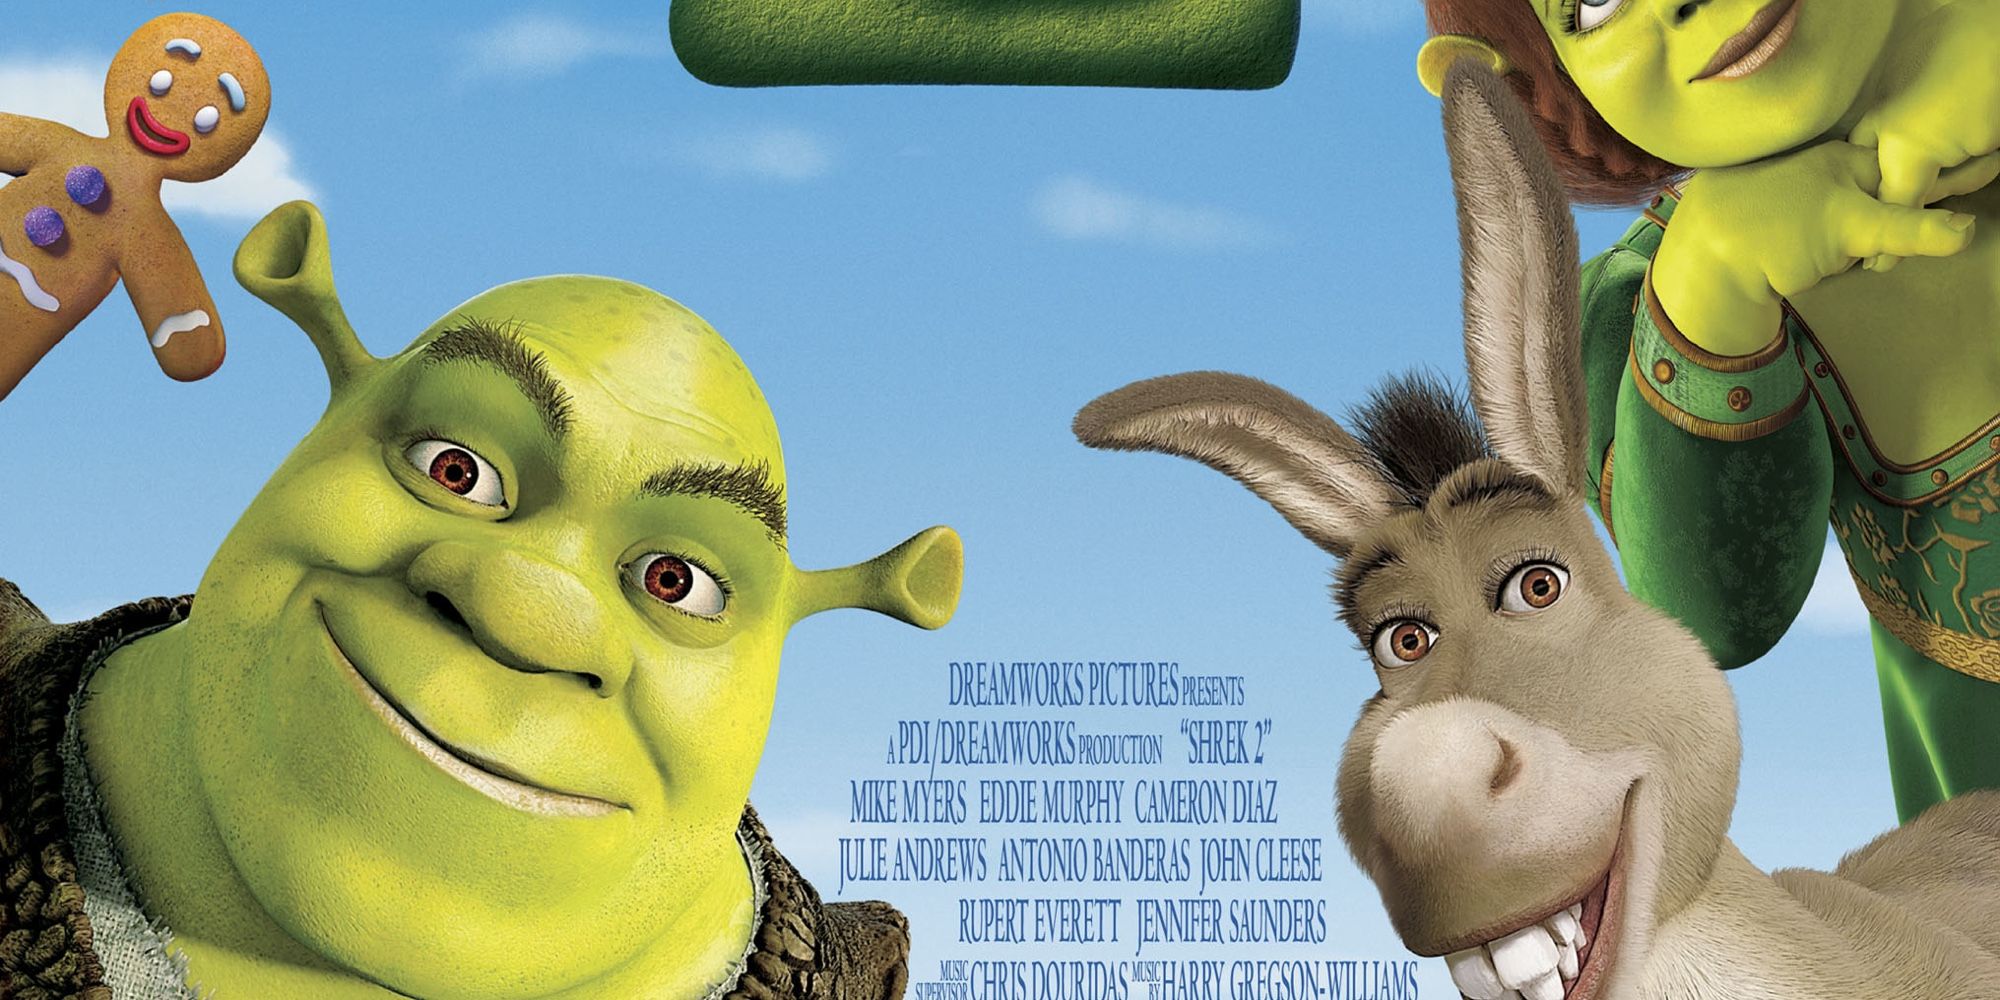 Shrek 2 download the last version for ios